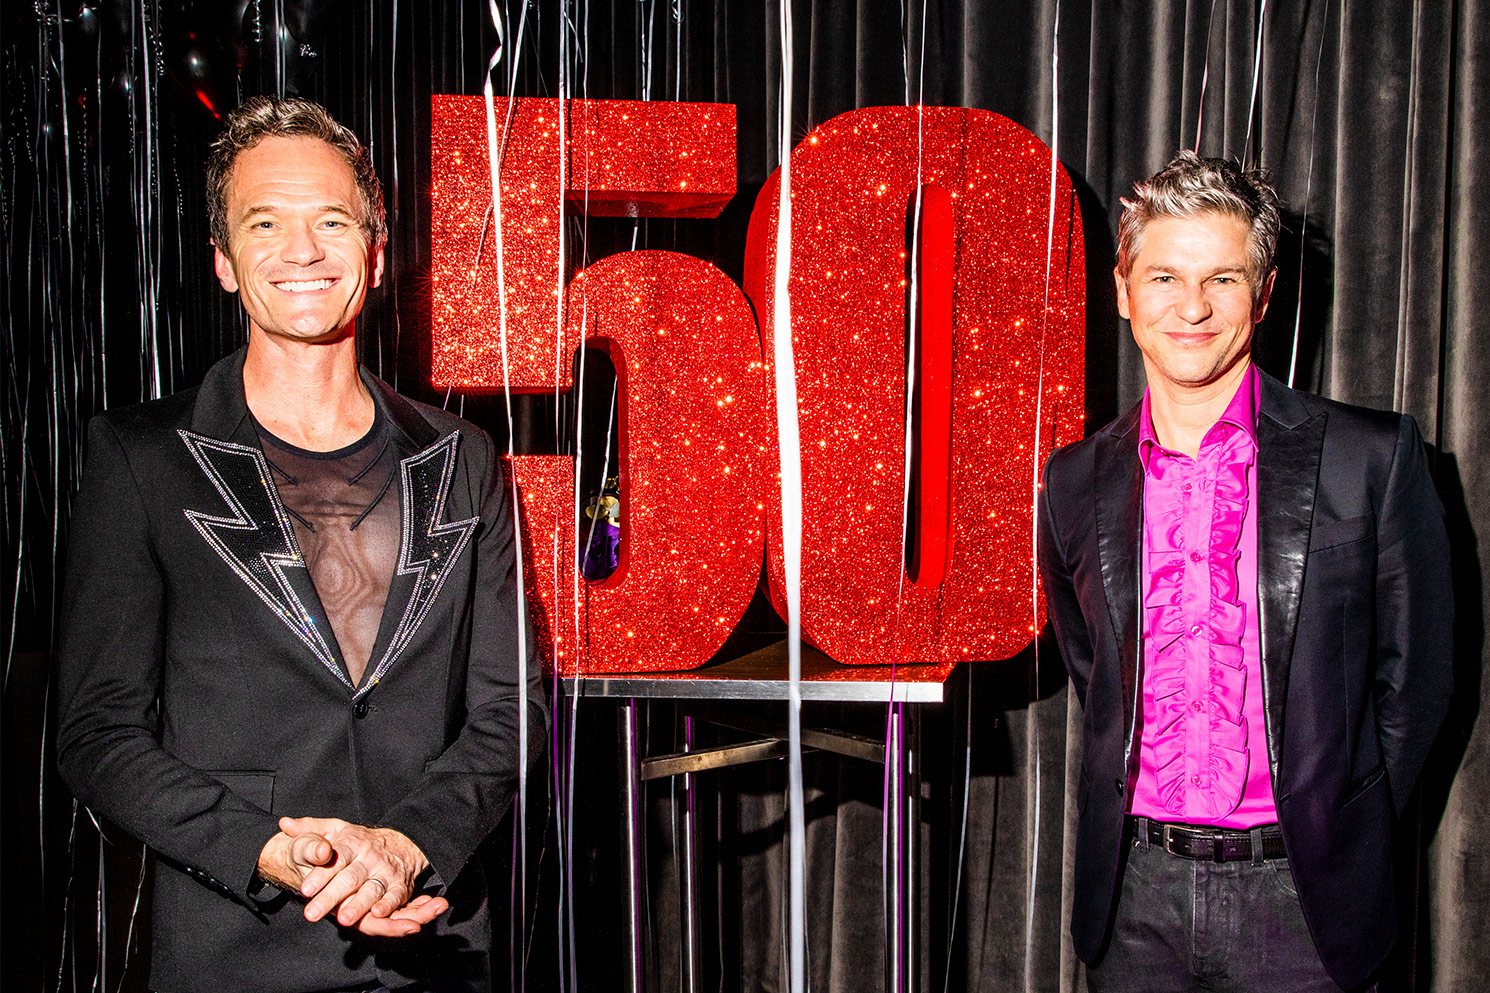 Neil Patrick Harris and husband, David, smiling next to giant, sparkly red 50